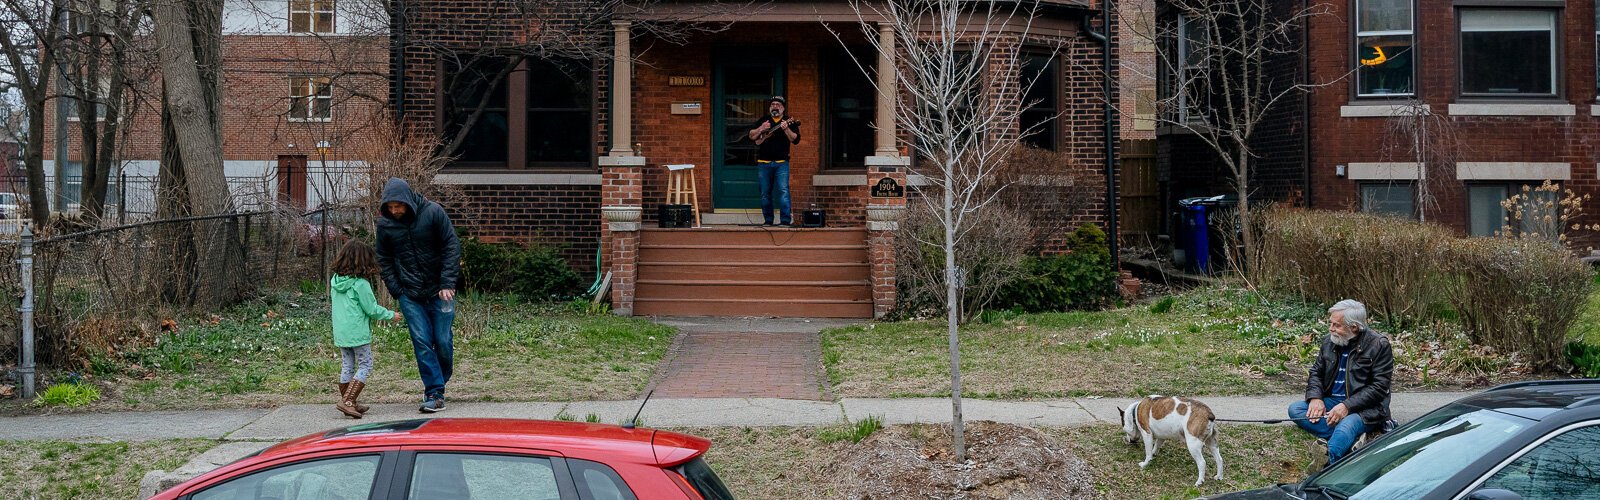 The COVID-19 pandemic has inspired creative Detroiters to share their musical talents through impromptu porch performances.